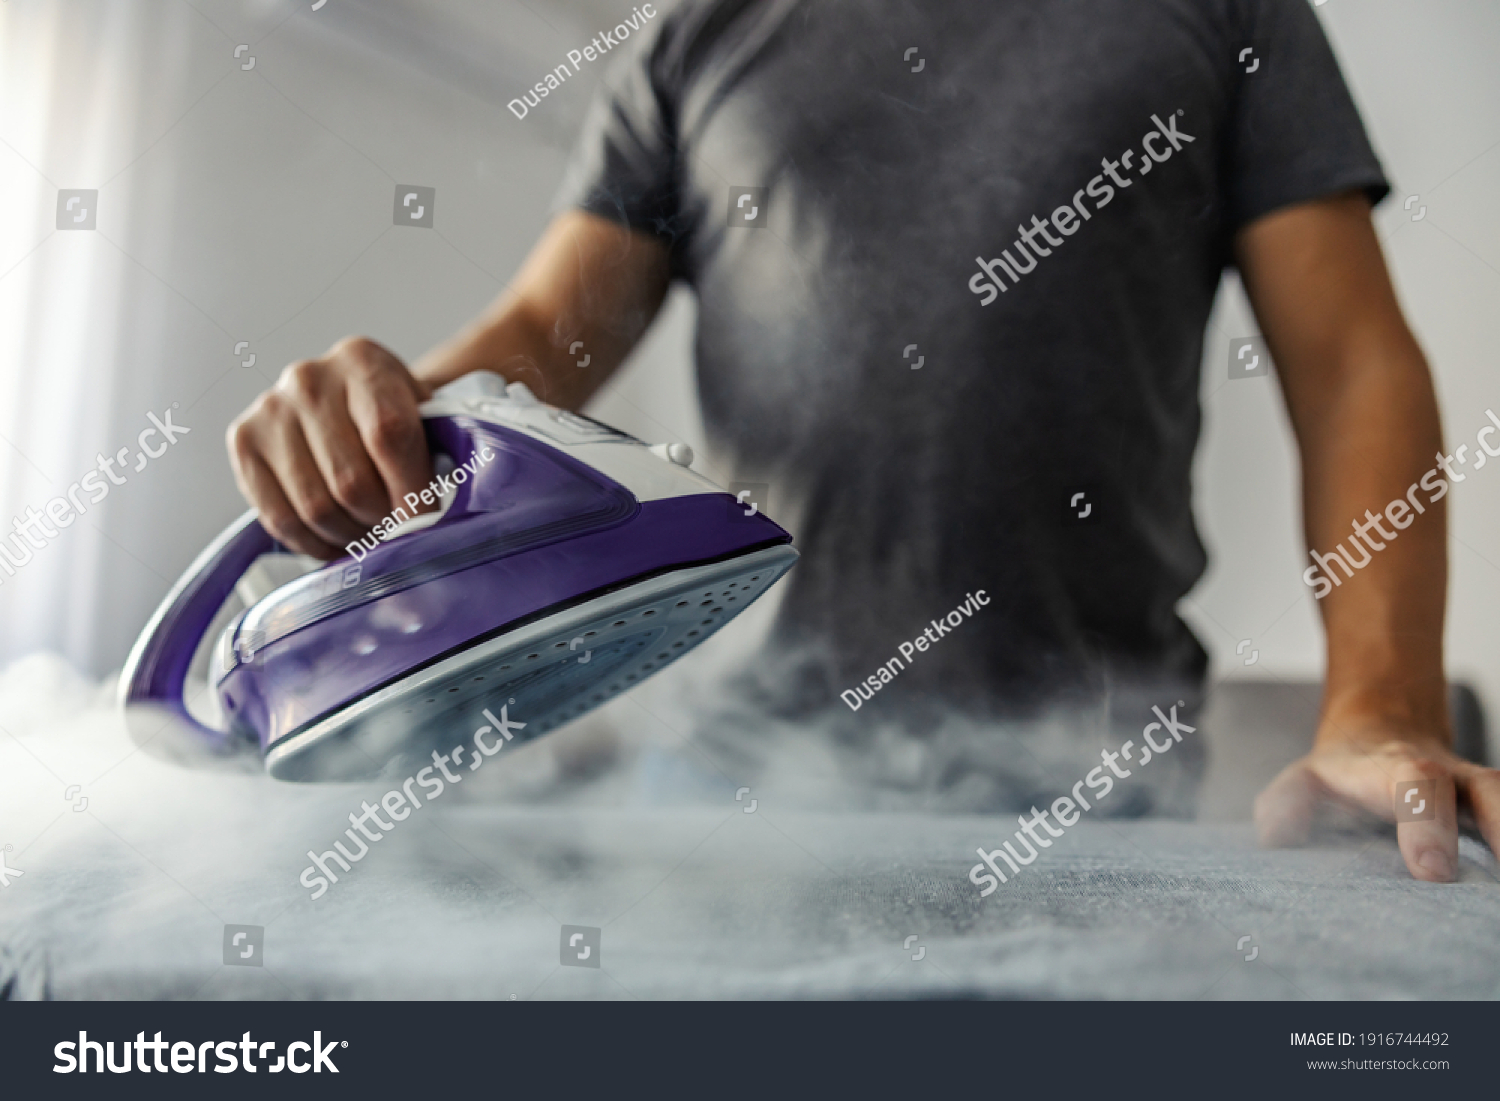 Powerful professional photo effect of water vapor from the hot iron. A modern lifestyle concept, a man who irons clothes at home #1916744492